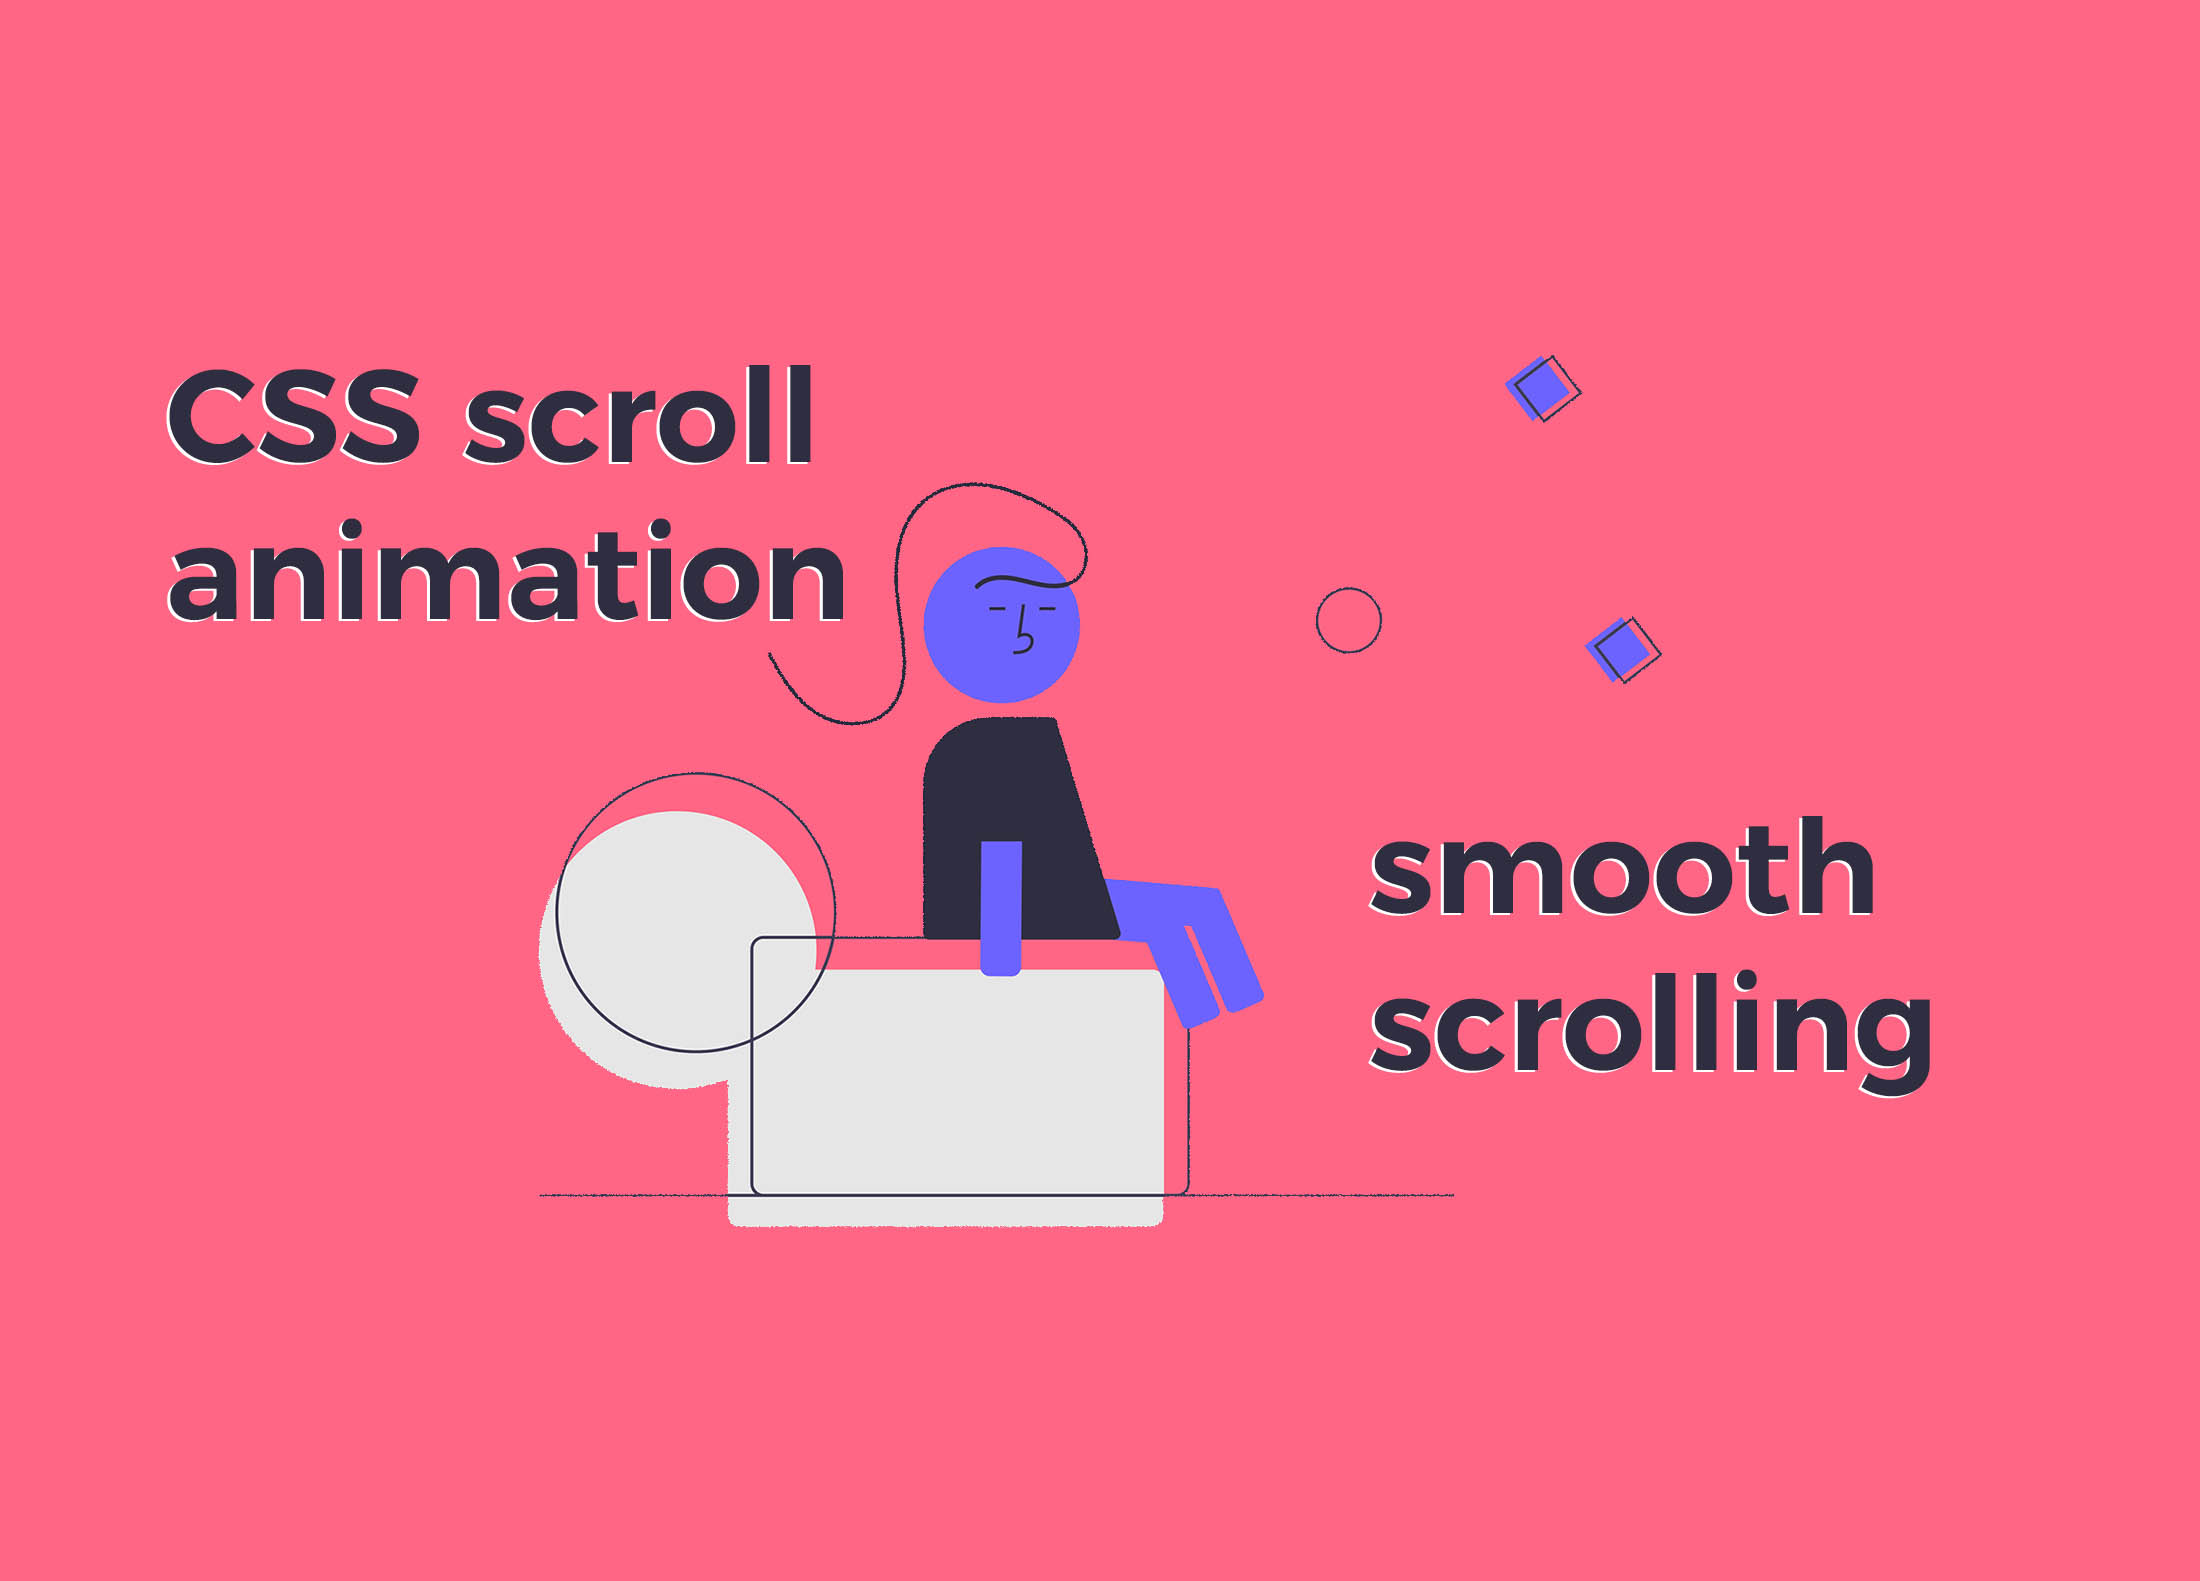 Add CSS Scroll Animation and Smooth Scrolling